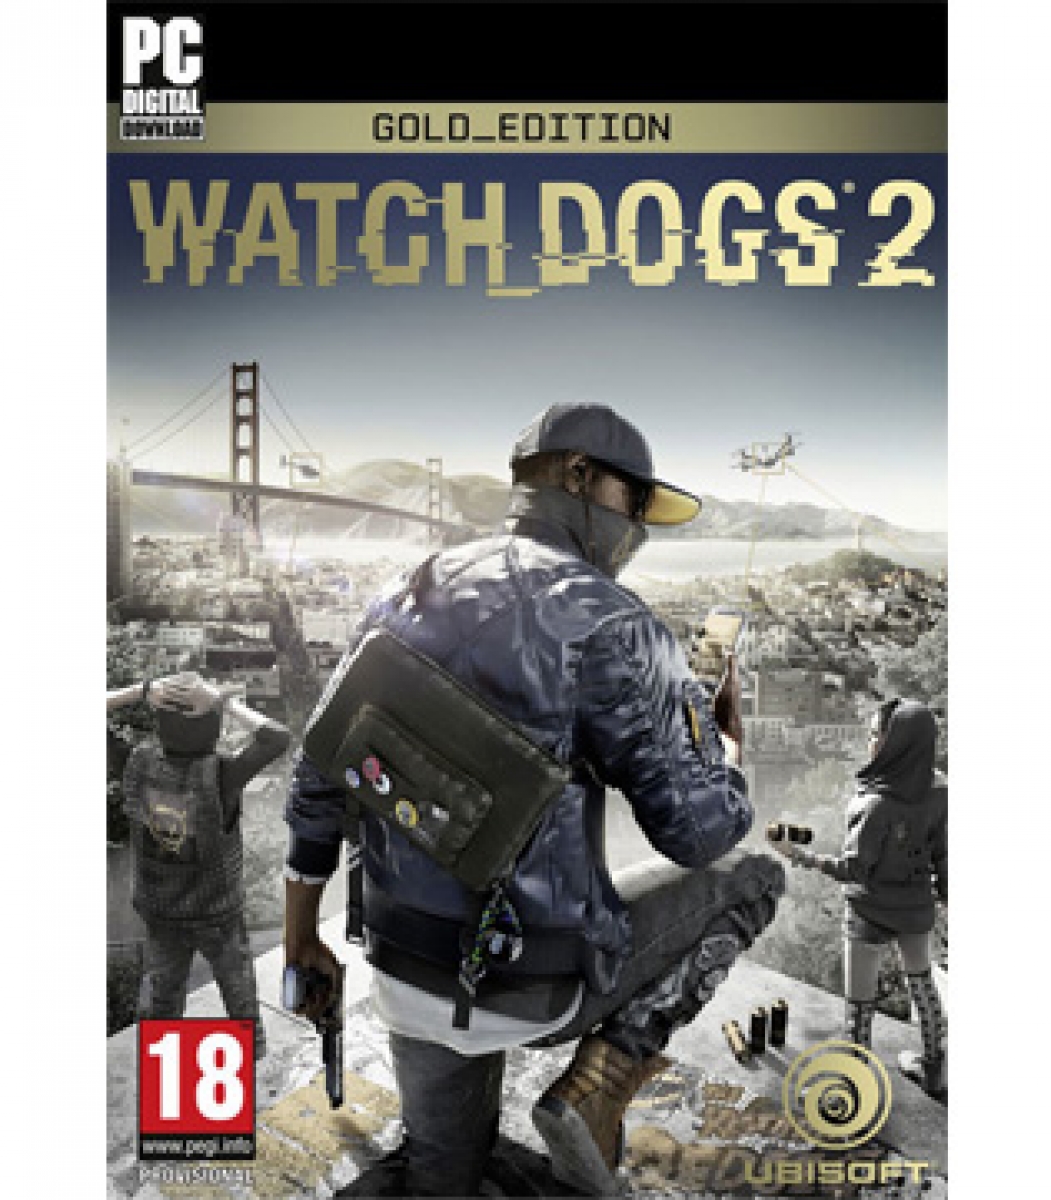 Watch_dogs® 2 – Gold Edition PC (Digital)